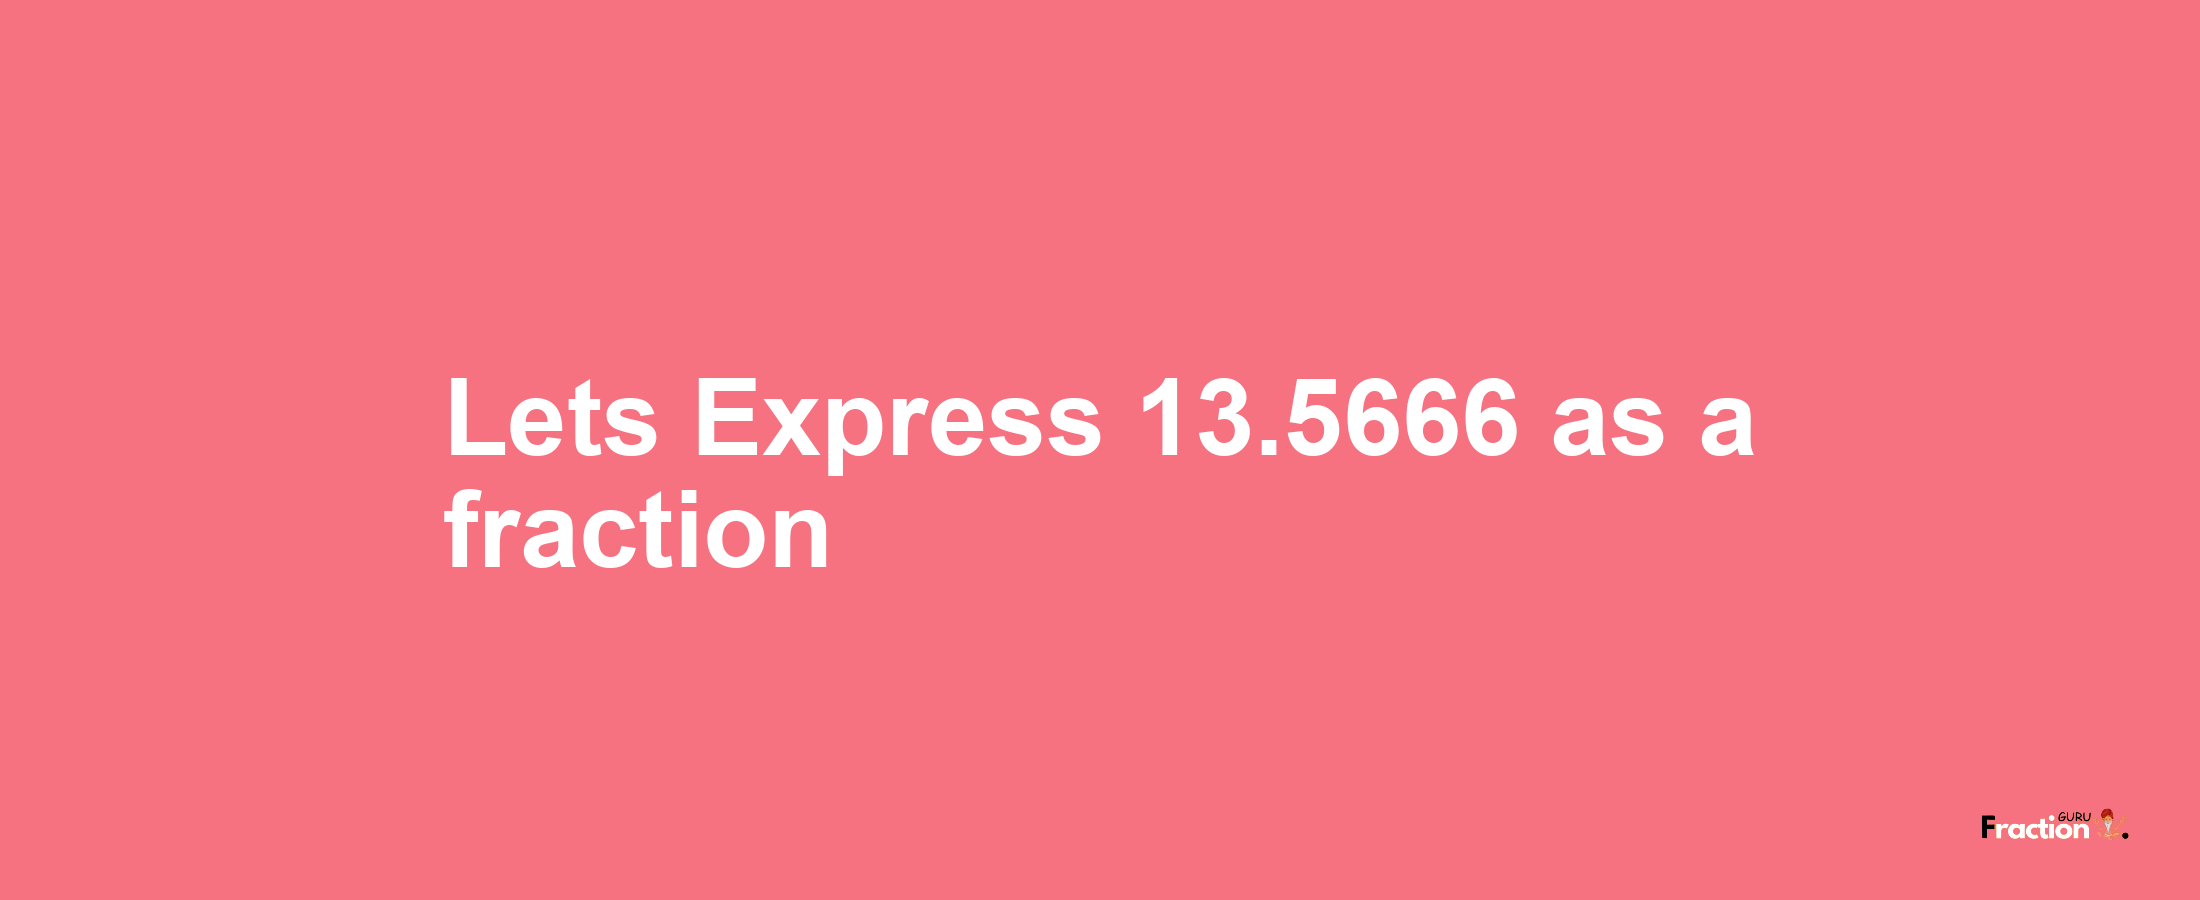 Lets Express 13.5666 as afraction